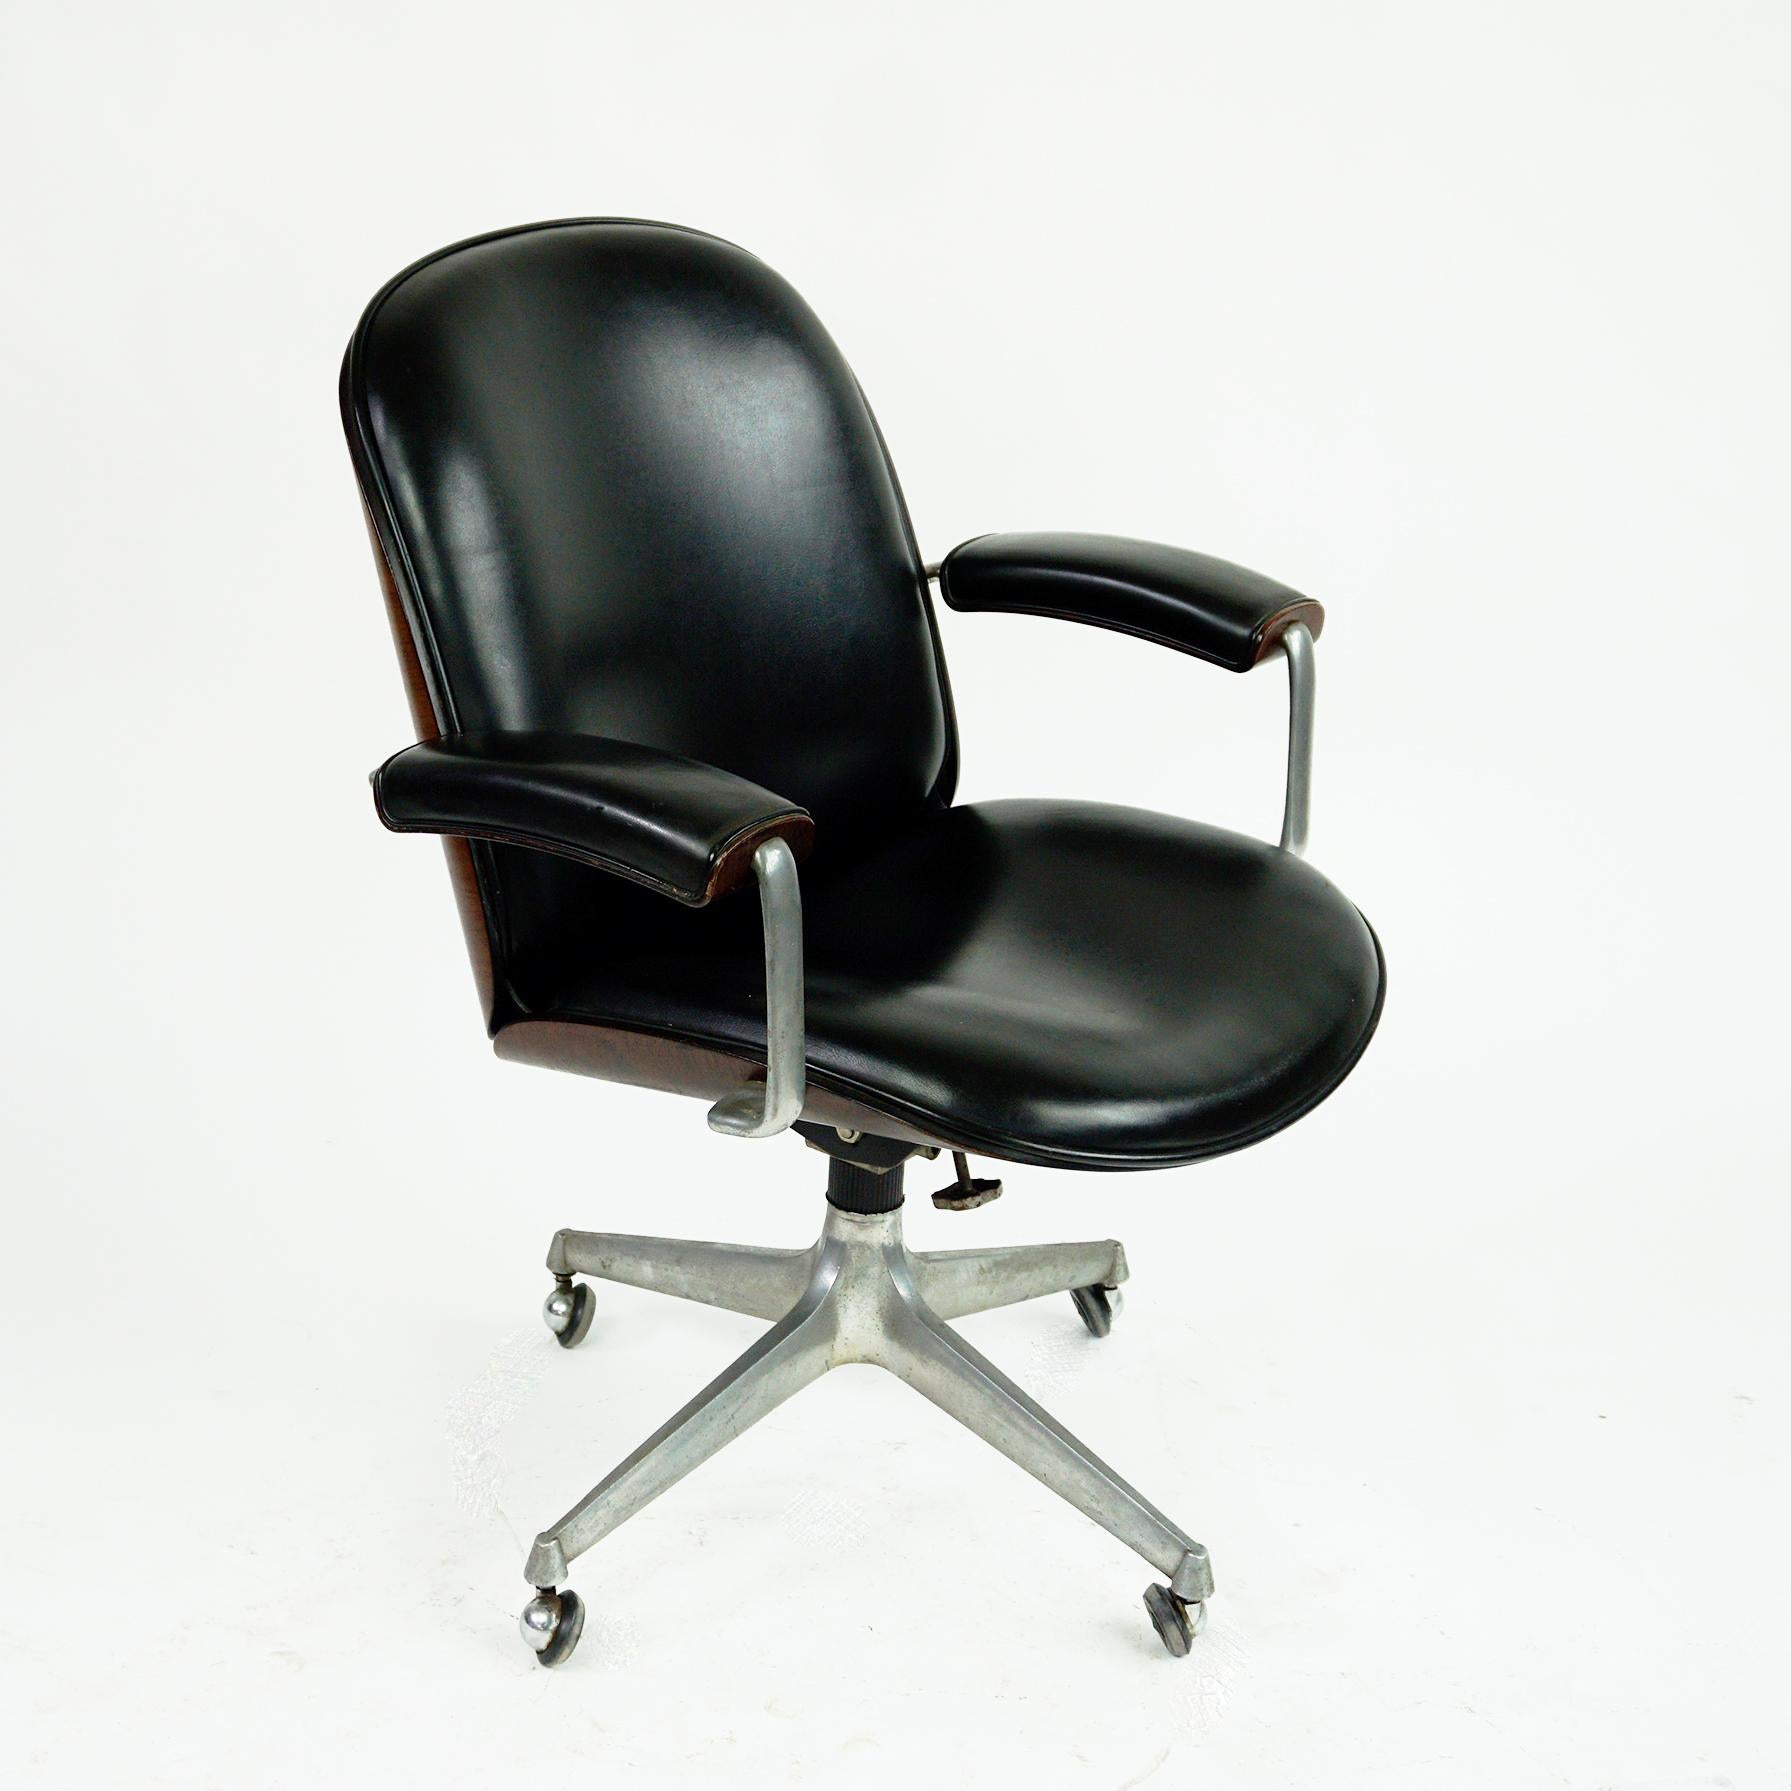 This Iconic Italian 1950s swivelling office chair on wheels from the Terni Series was designed by Ico Parisi for MIM Roma . Mobili Italiani Moderni- 1959.
It features a four star cast aluminum base, rosewood veneer and original black leatherette